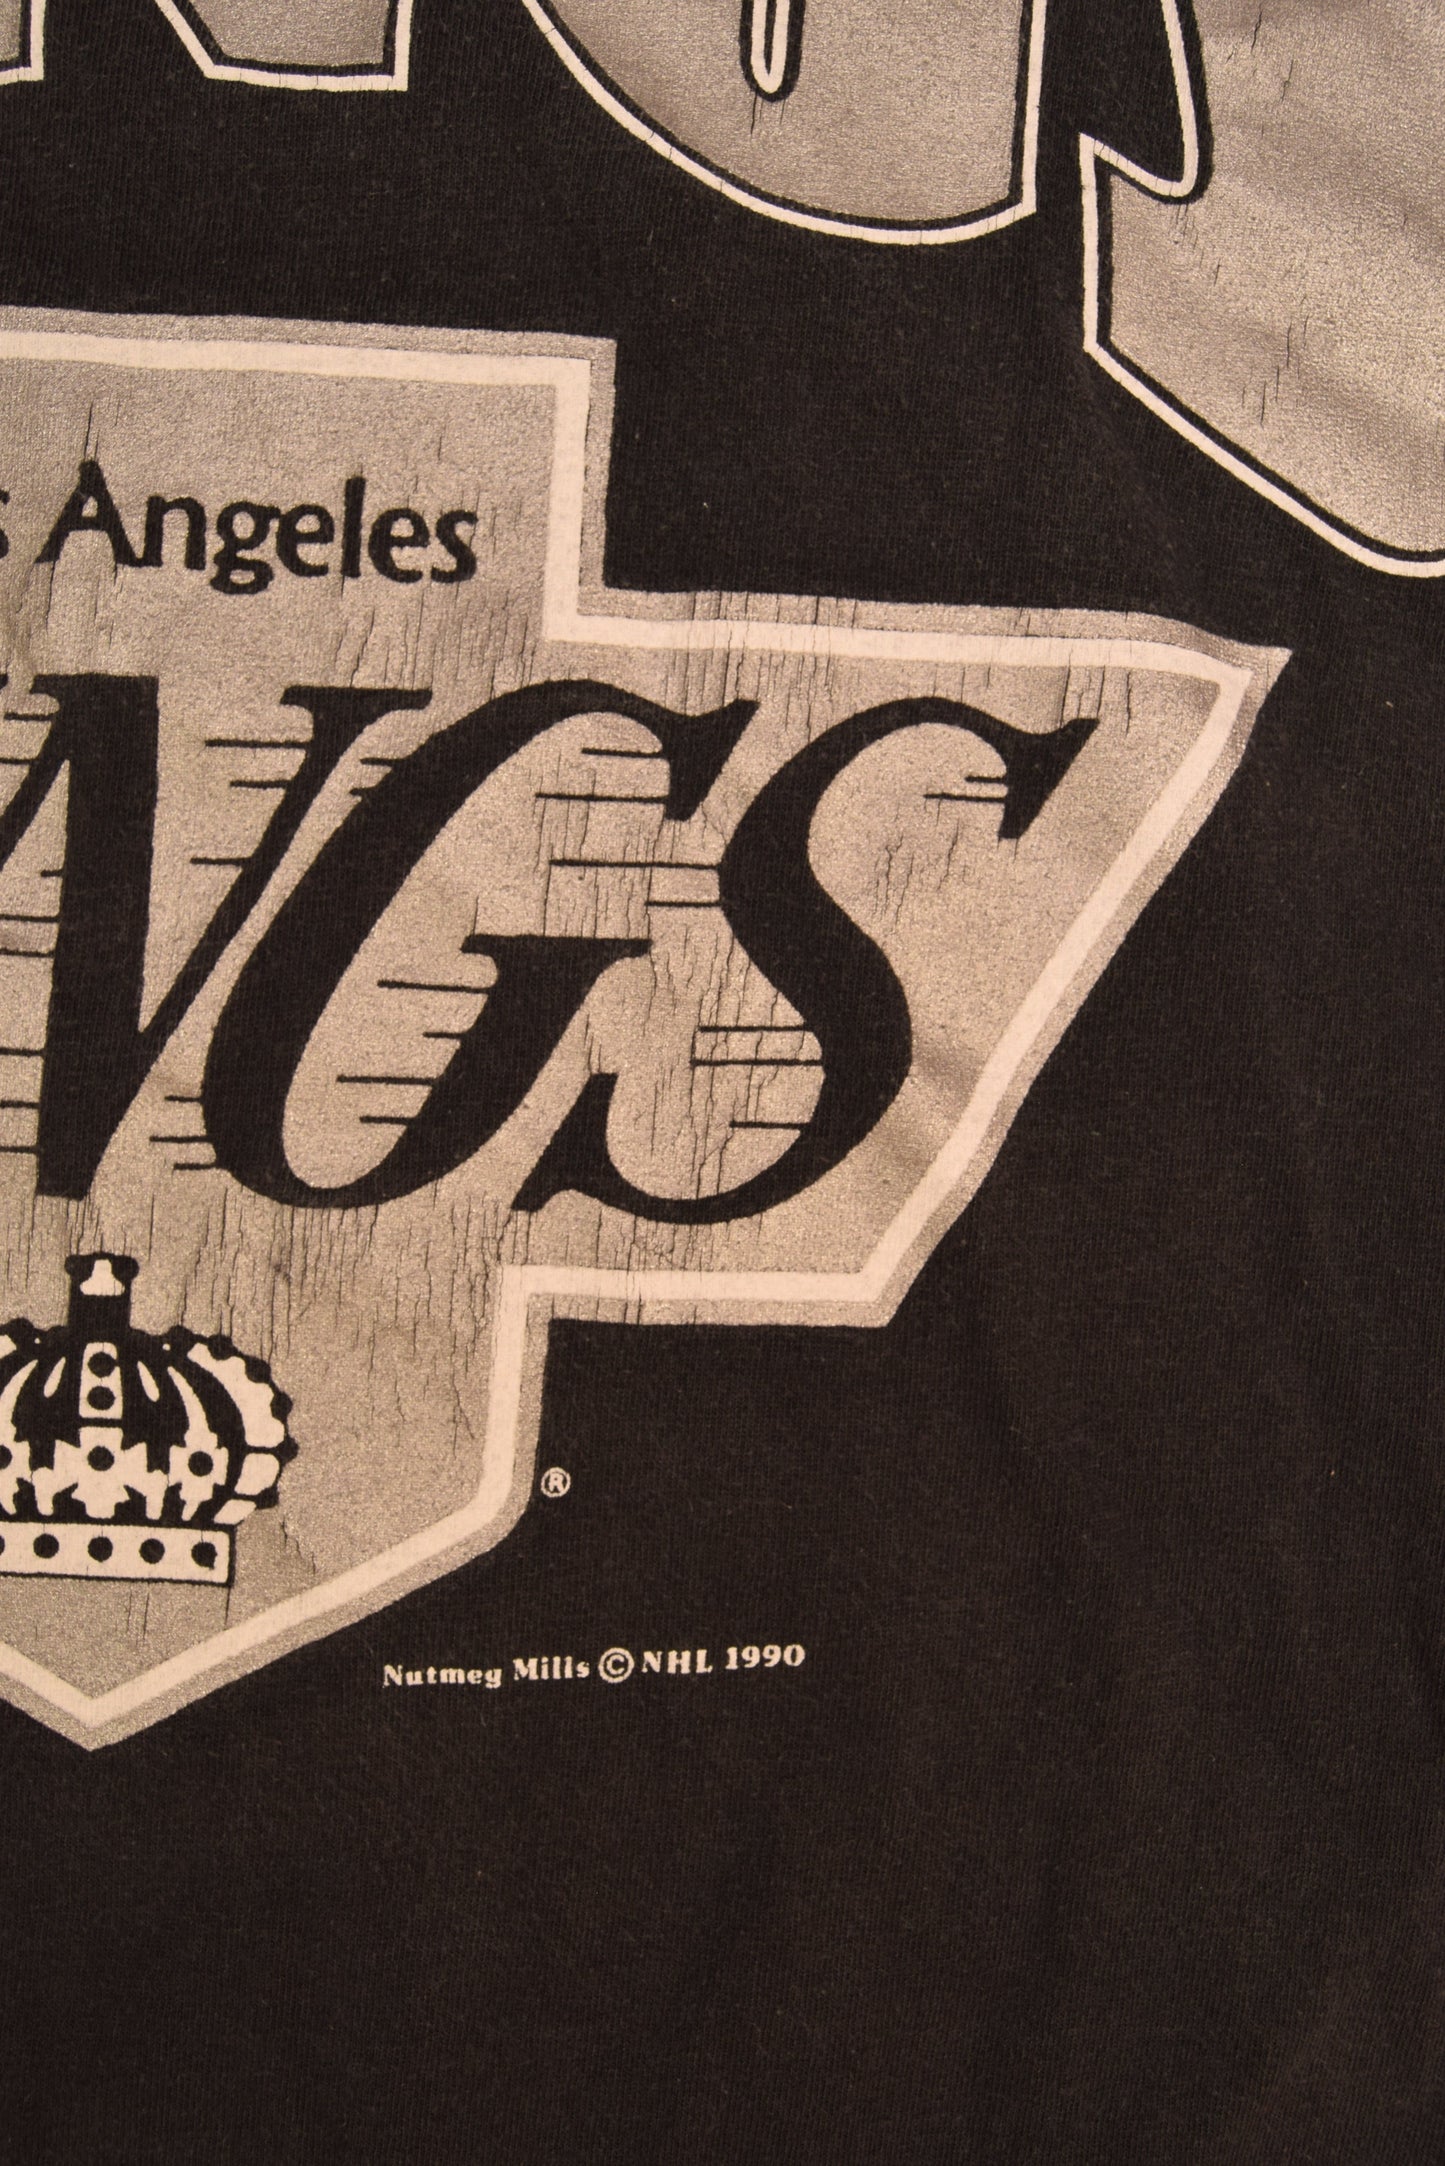 Los Angeles Kings Nutmeg Mills NHL 1990 Made in USA Size L Sigle Stitch